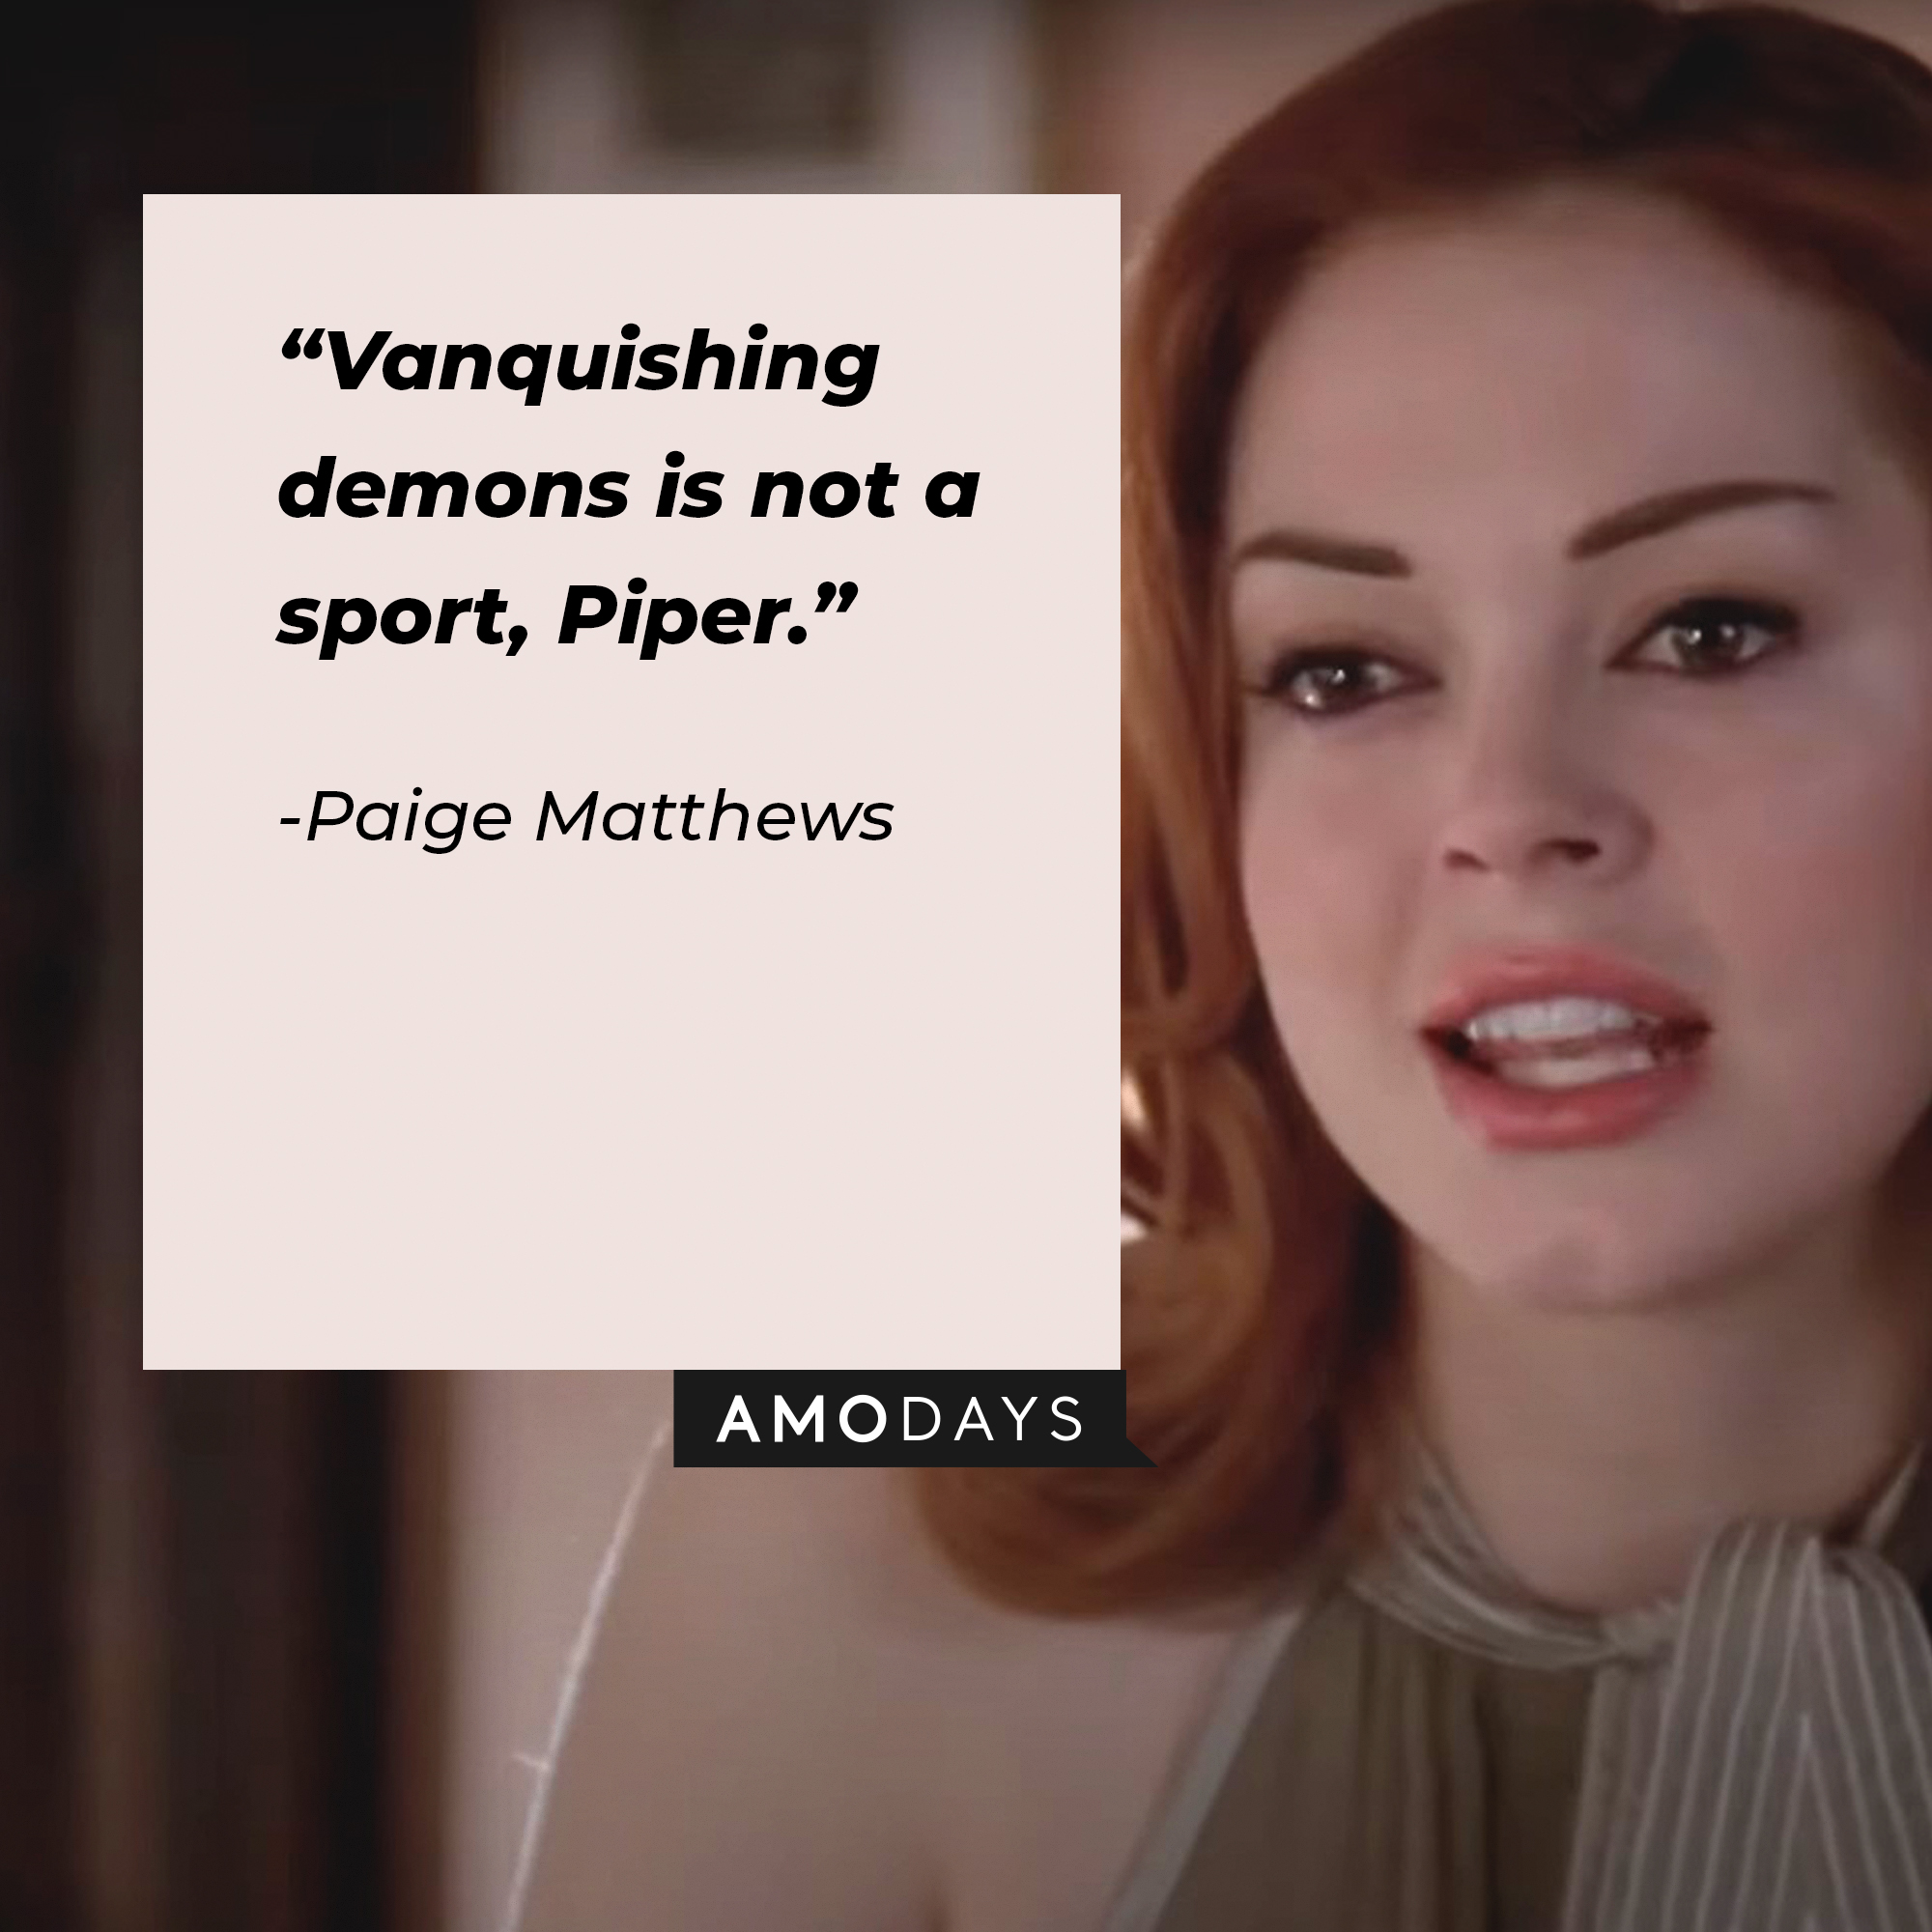 An image of Paige Matthews with her quote:“Vanquishing demons is not a sport, Piper.” │Source: facebook.com/charmedtv